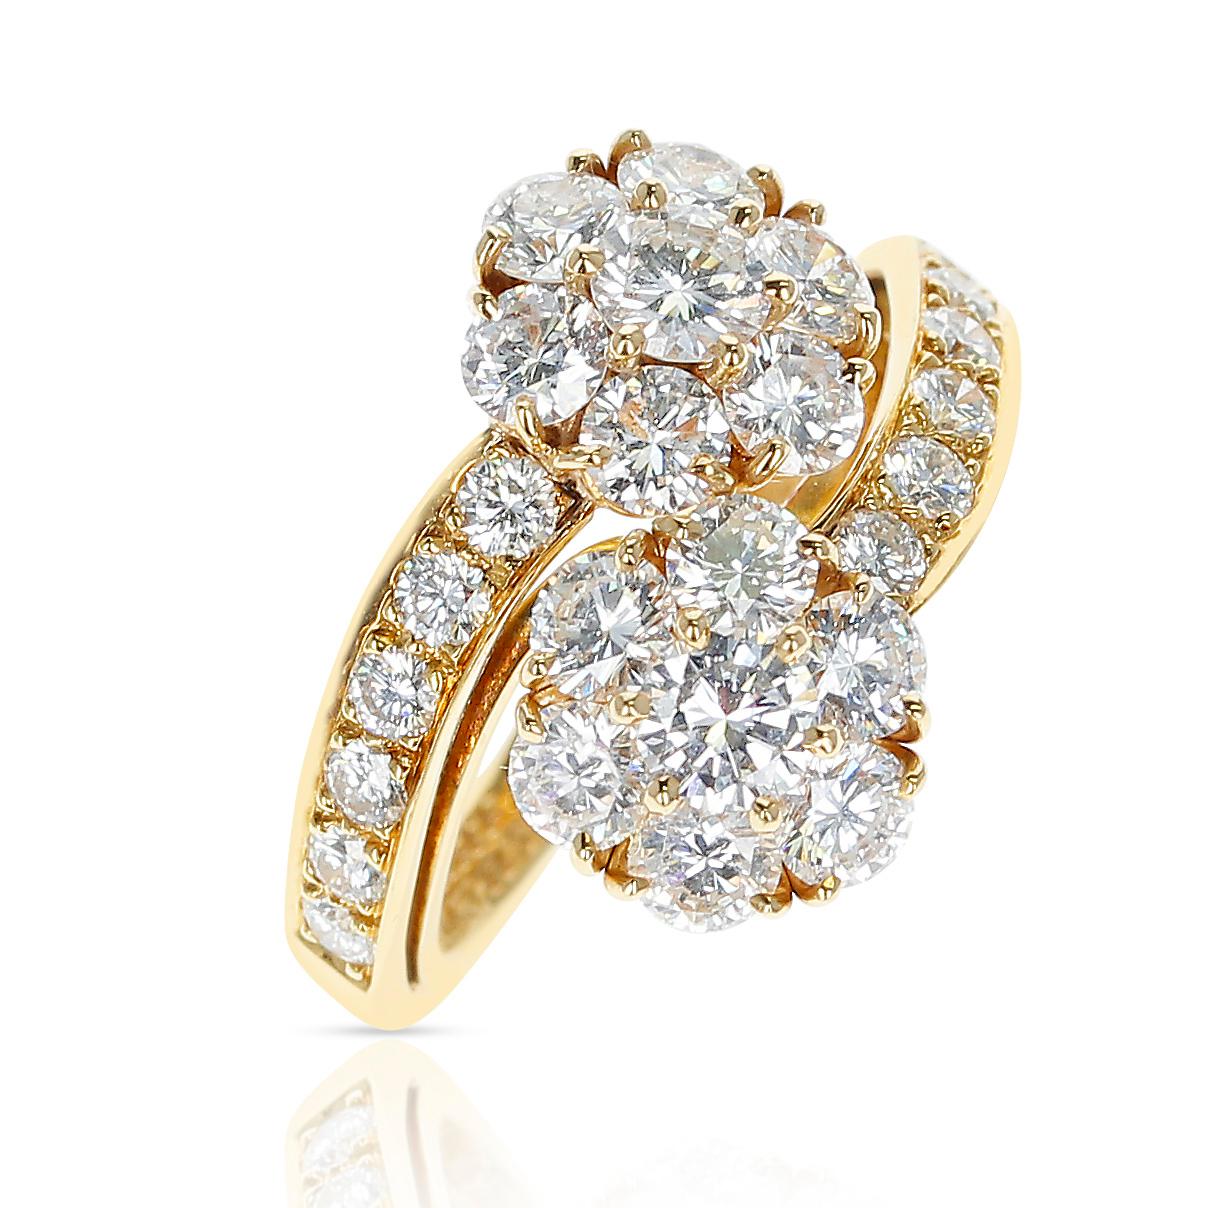 A Van Cleef & Arpels Double Fleurette Ring with approximately 2.50 ct. of Diamonds. Ring Size US 5. Total Weight: 5.45 grams. The color of the diamonds is appx. F and the clarity is VS1. 
 
